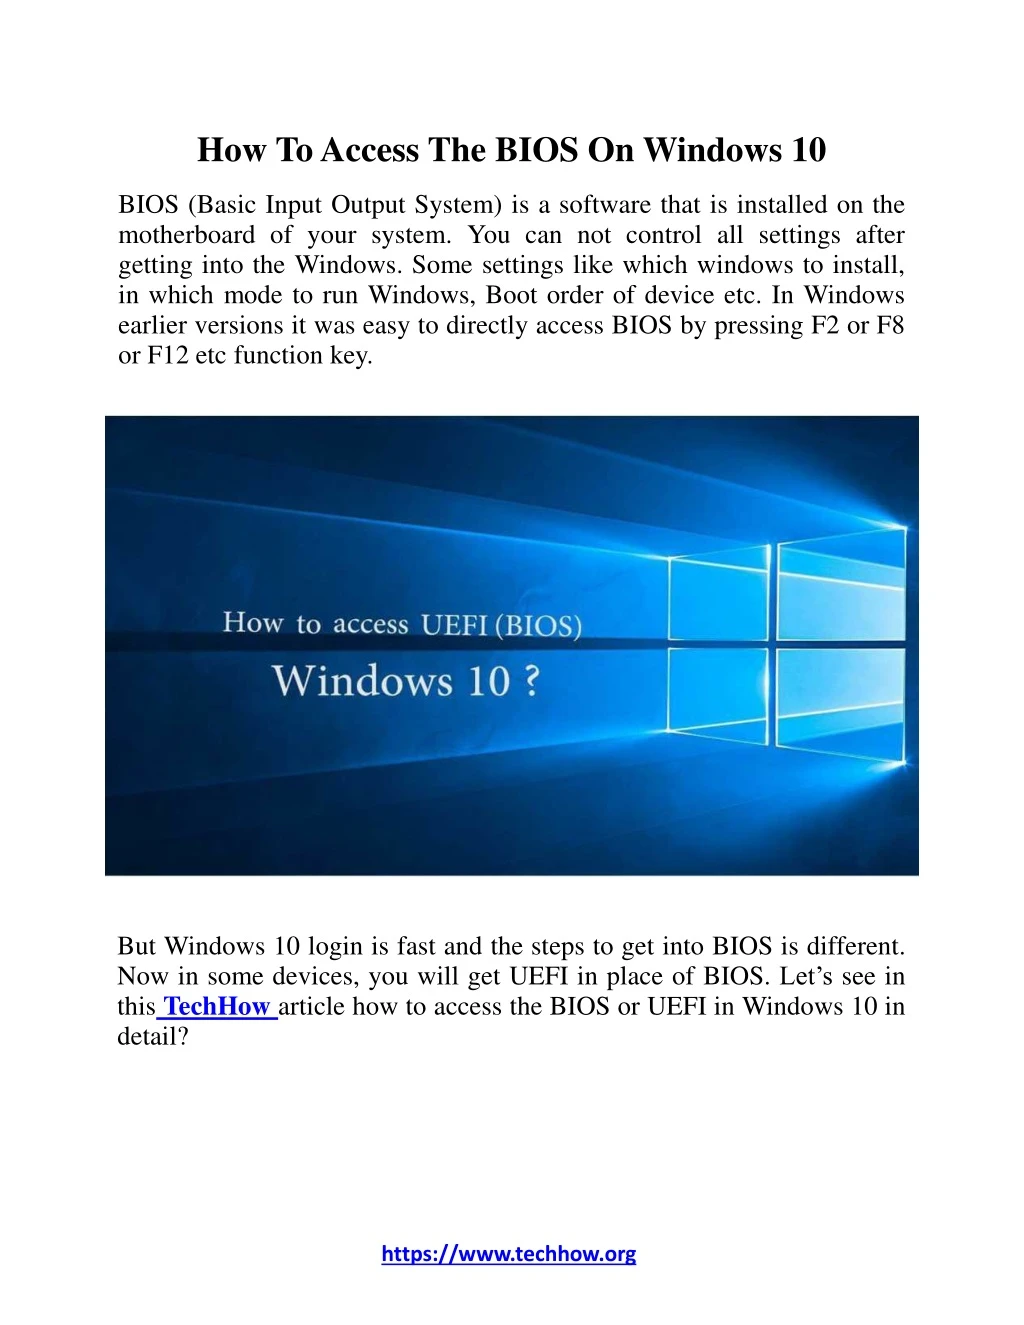 how to access the bios on windows 10